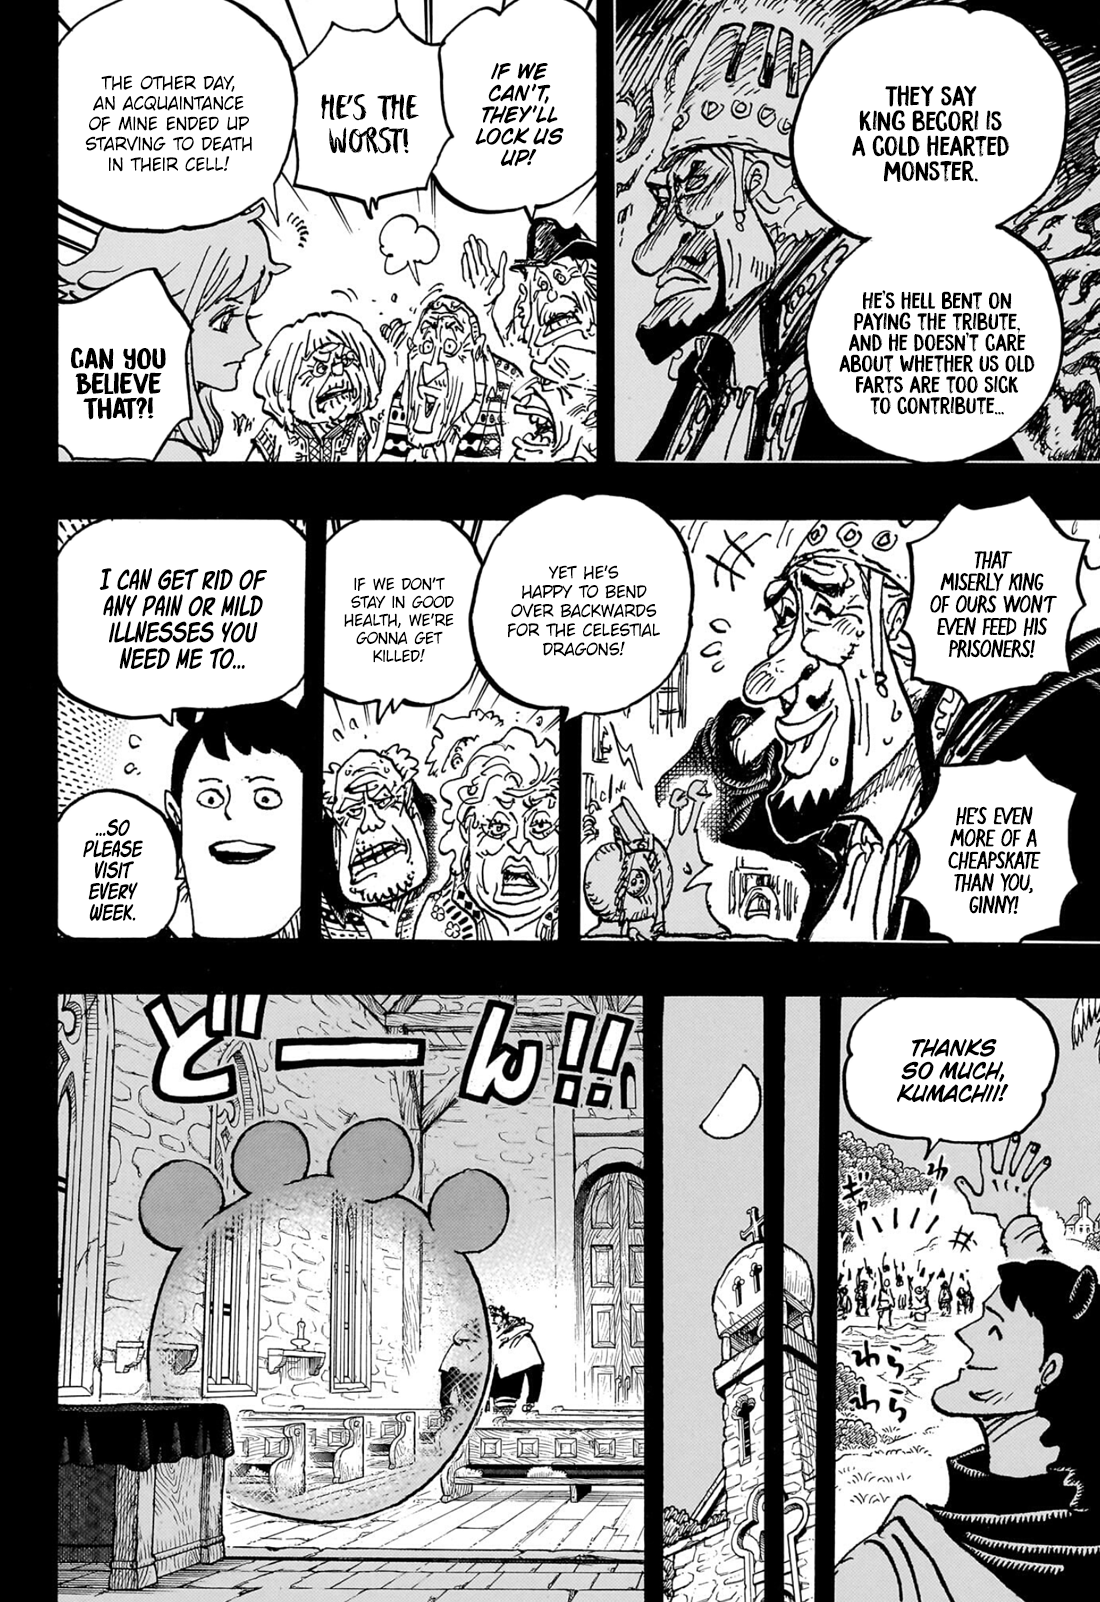 One Piece: Chapter 1057 - Theories and Discussion : r/OnePiece